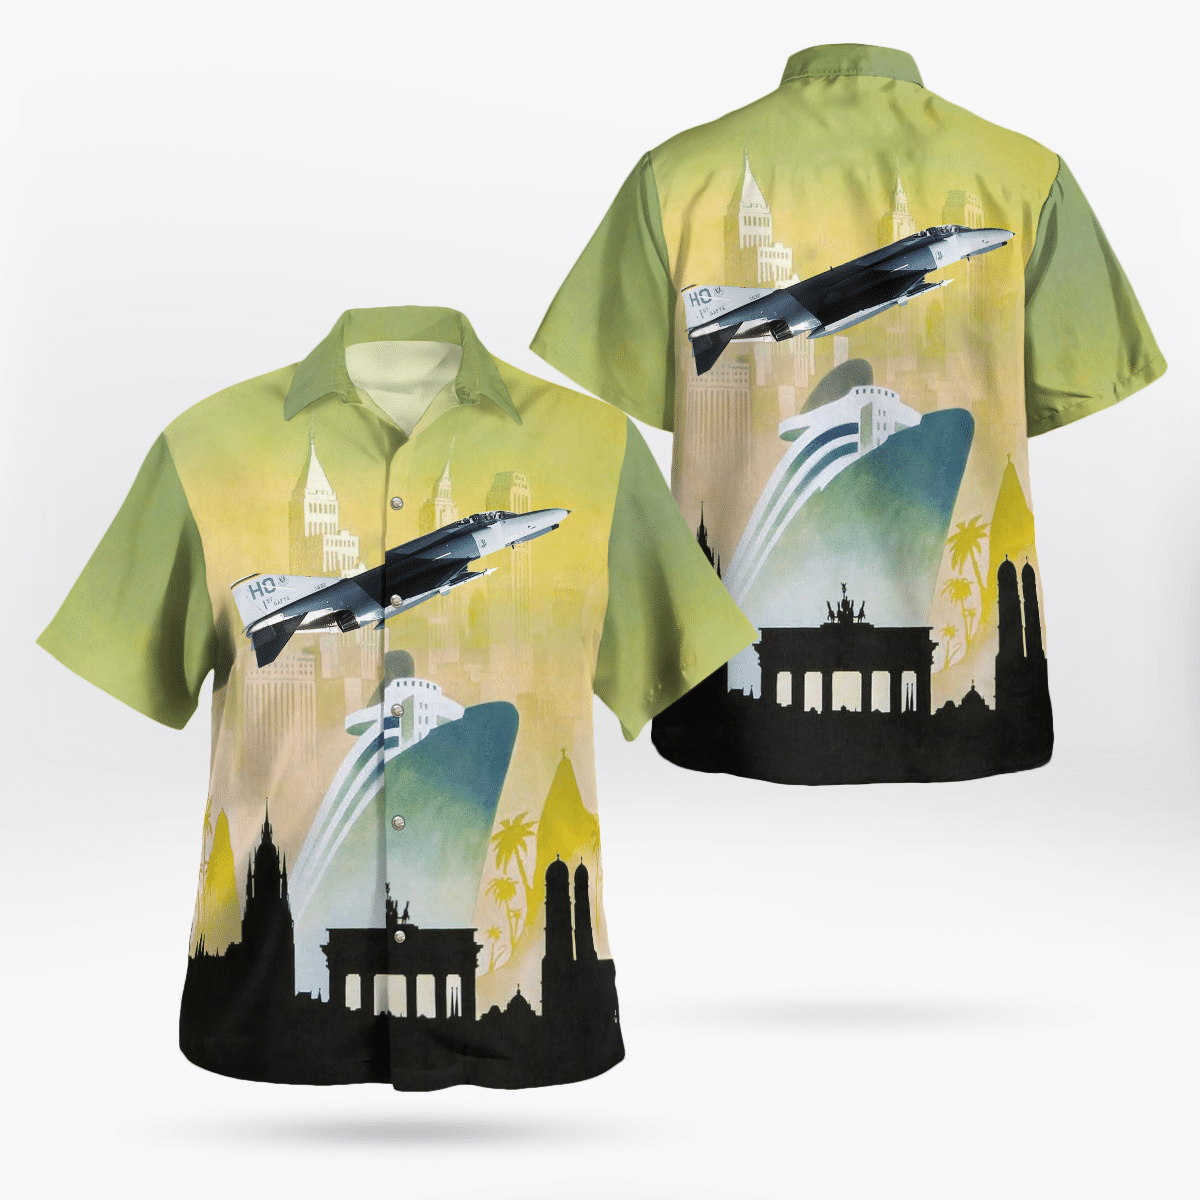 Shop now to find the perfect Hawaii Shirt for your hobby 158